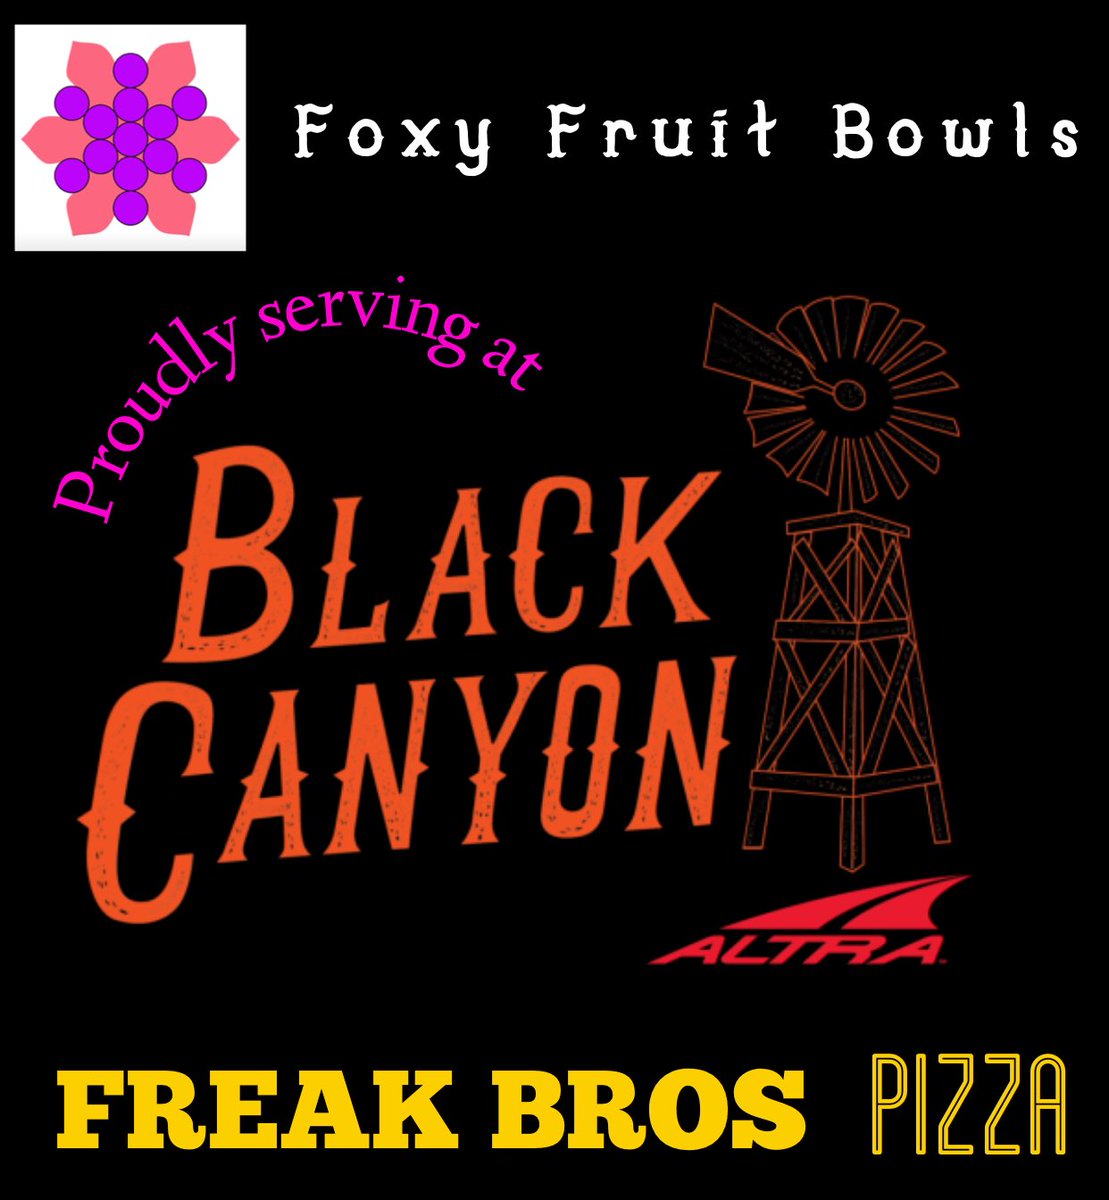 We will be at BOTH the 60k and 100k finish lines on Saturday at #BlackCanyonUltras! All runners receive a complimentary pie! Foxy Fruit will be joining us at the 60k finish line..runners choice, complimentary Pizza or Fruit Bowl! Show us you bib and enjoy 🍕🍒